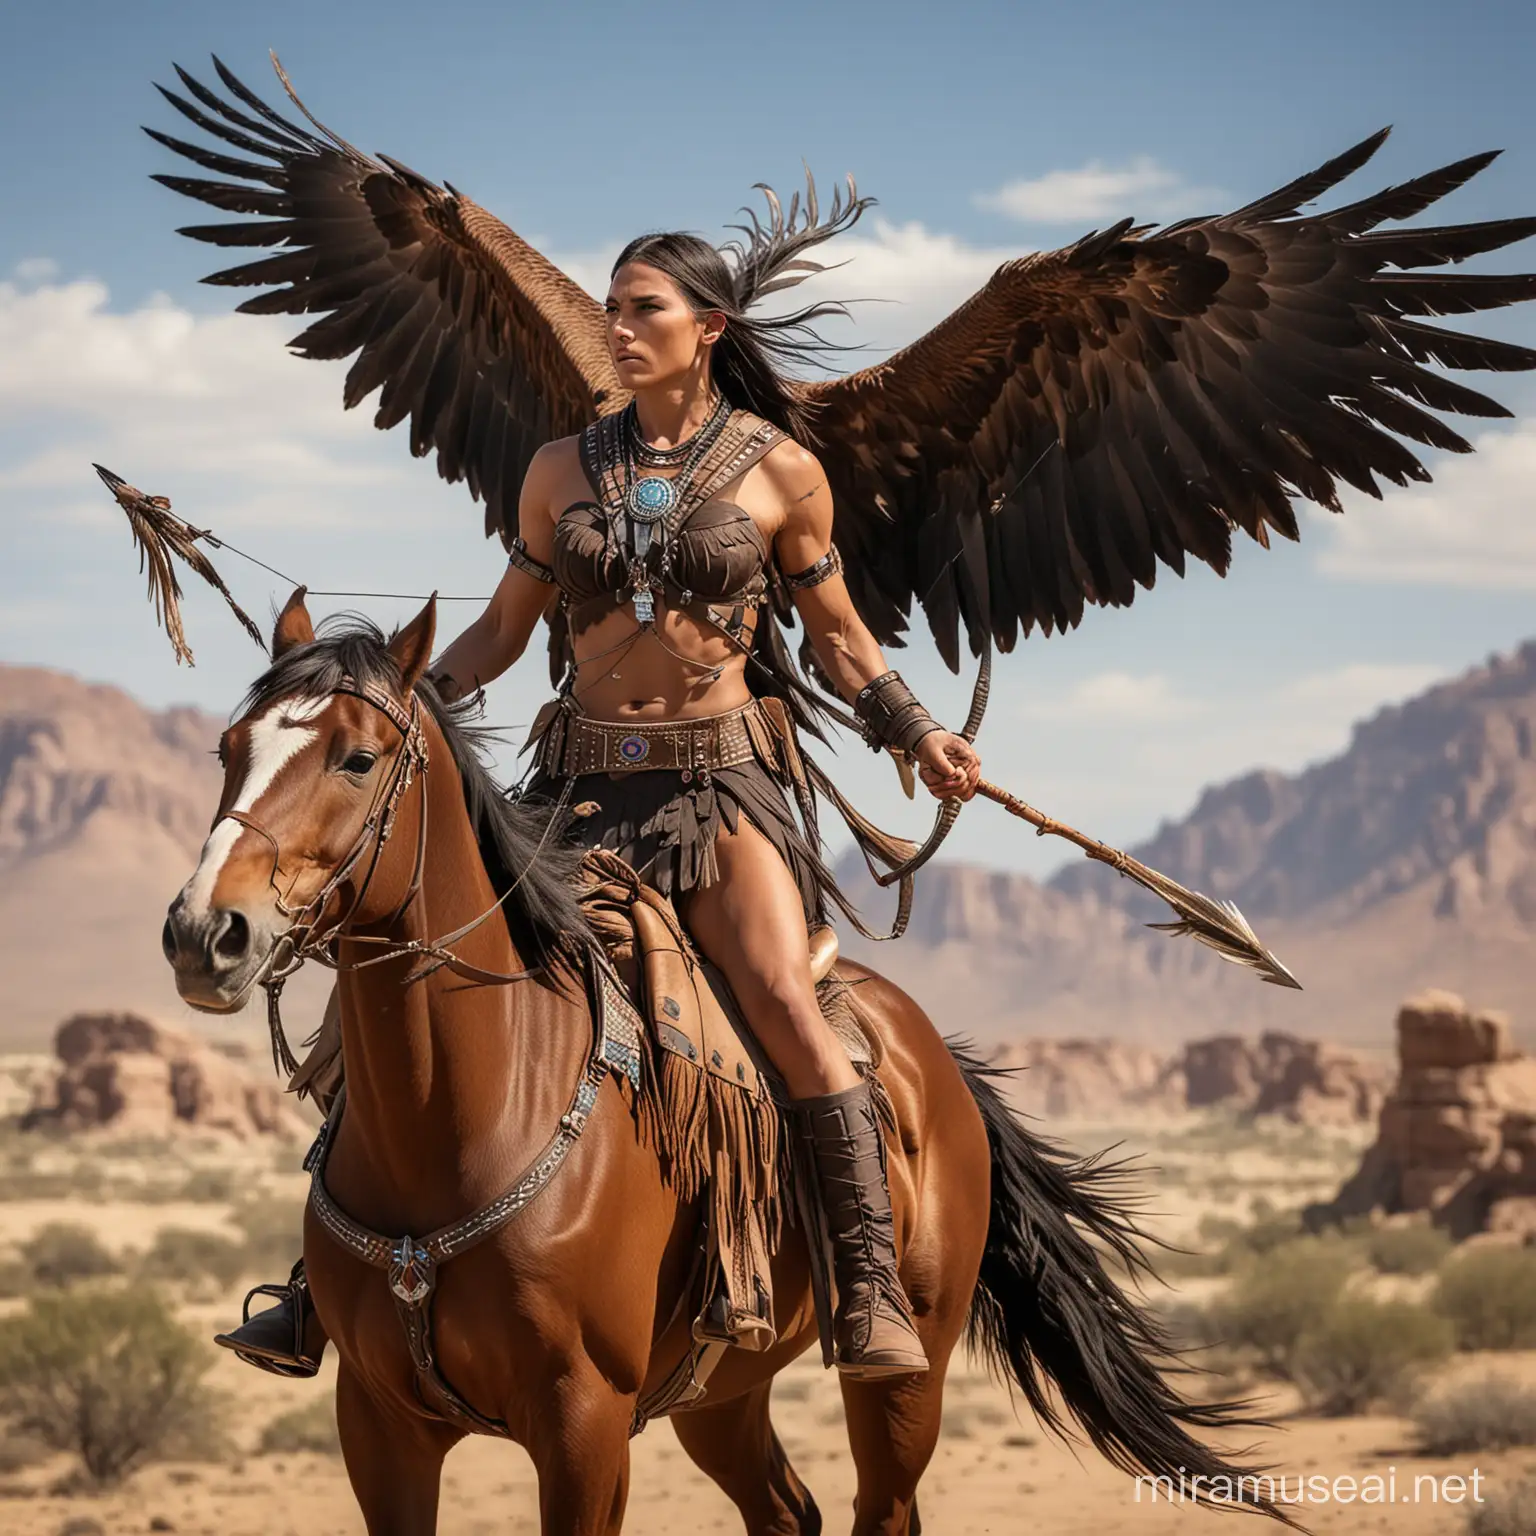 Apache Warrior on Horseback with Wings and Bald Eagle in Desert